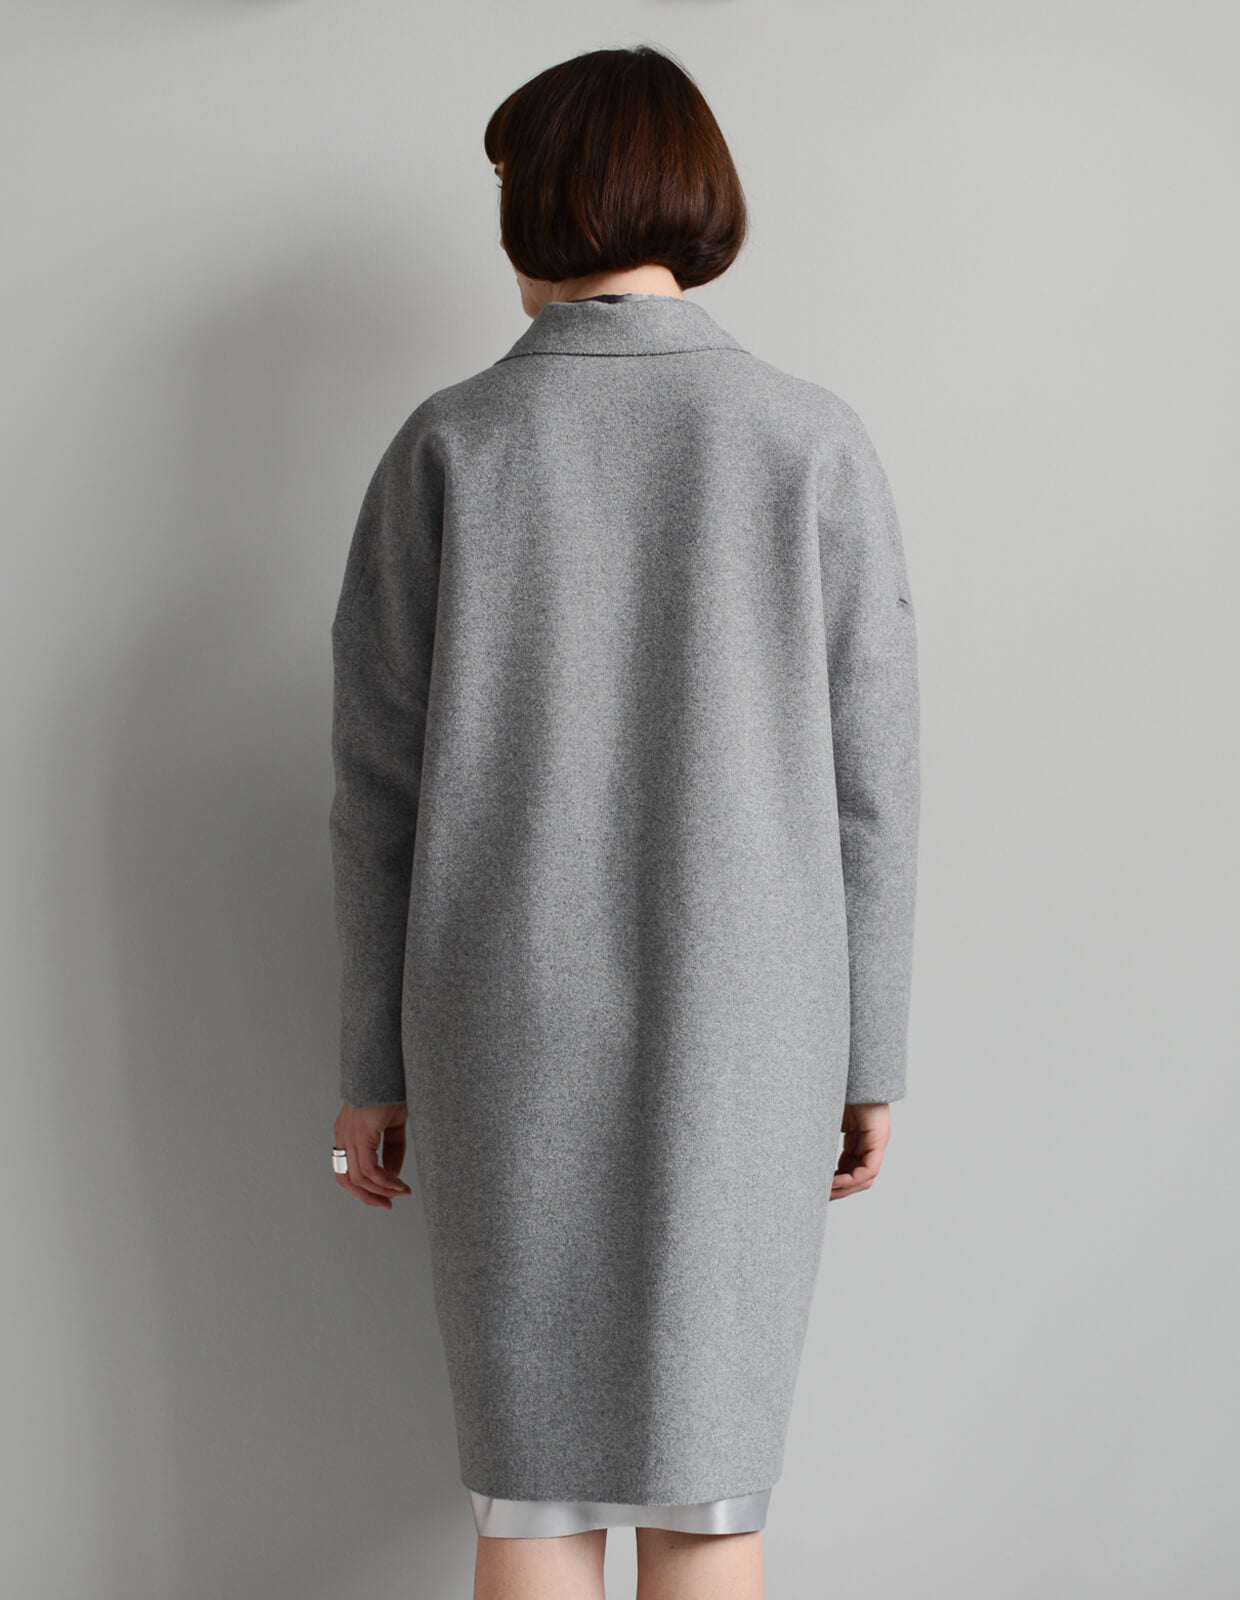 The Maker's Atelier Unlined Raw-edged Coat